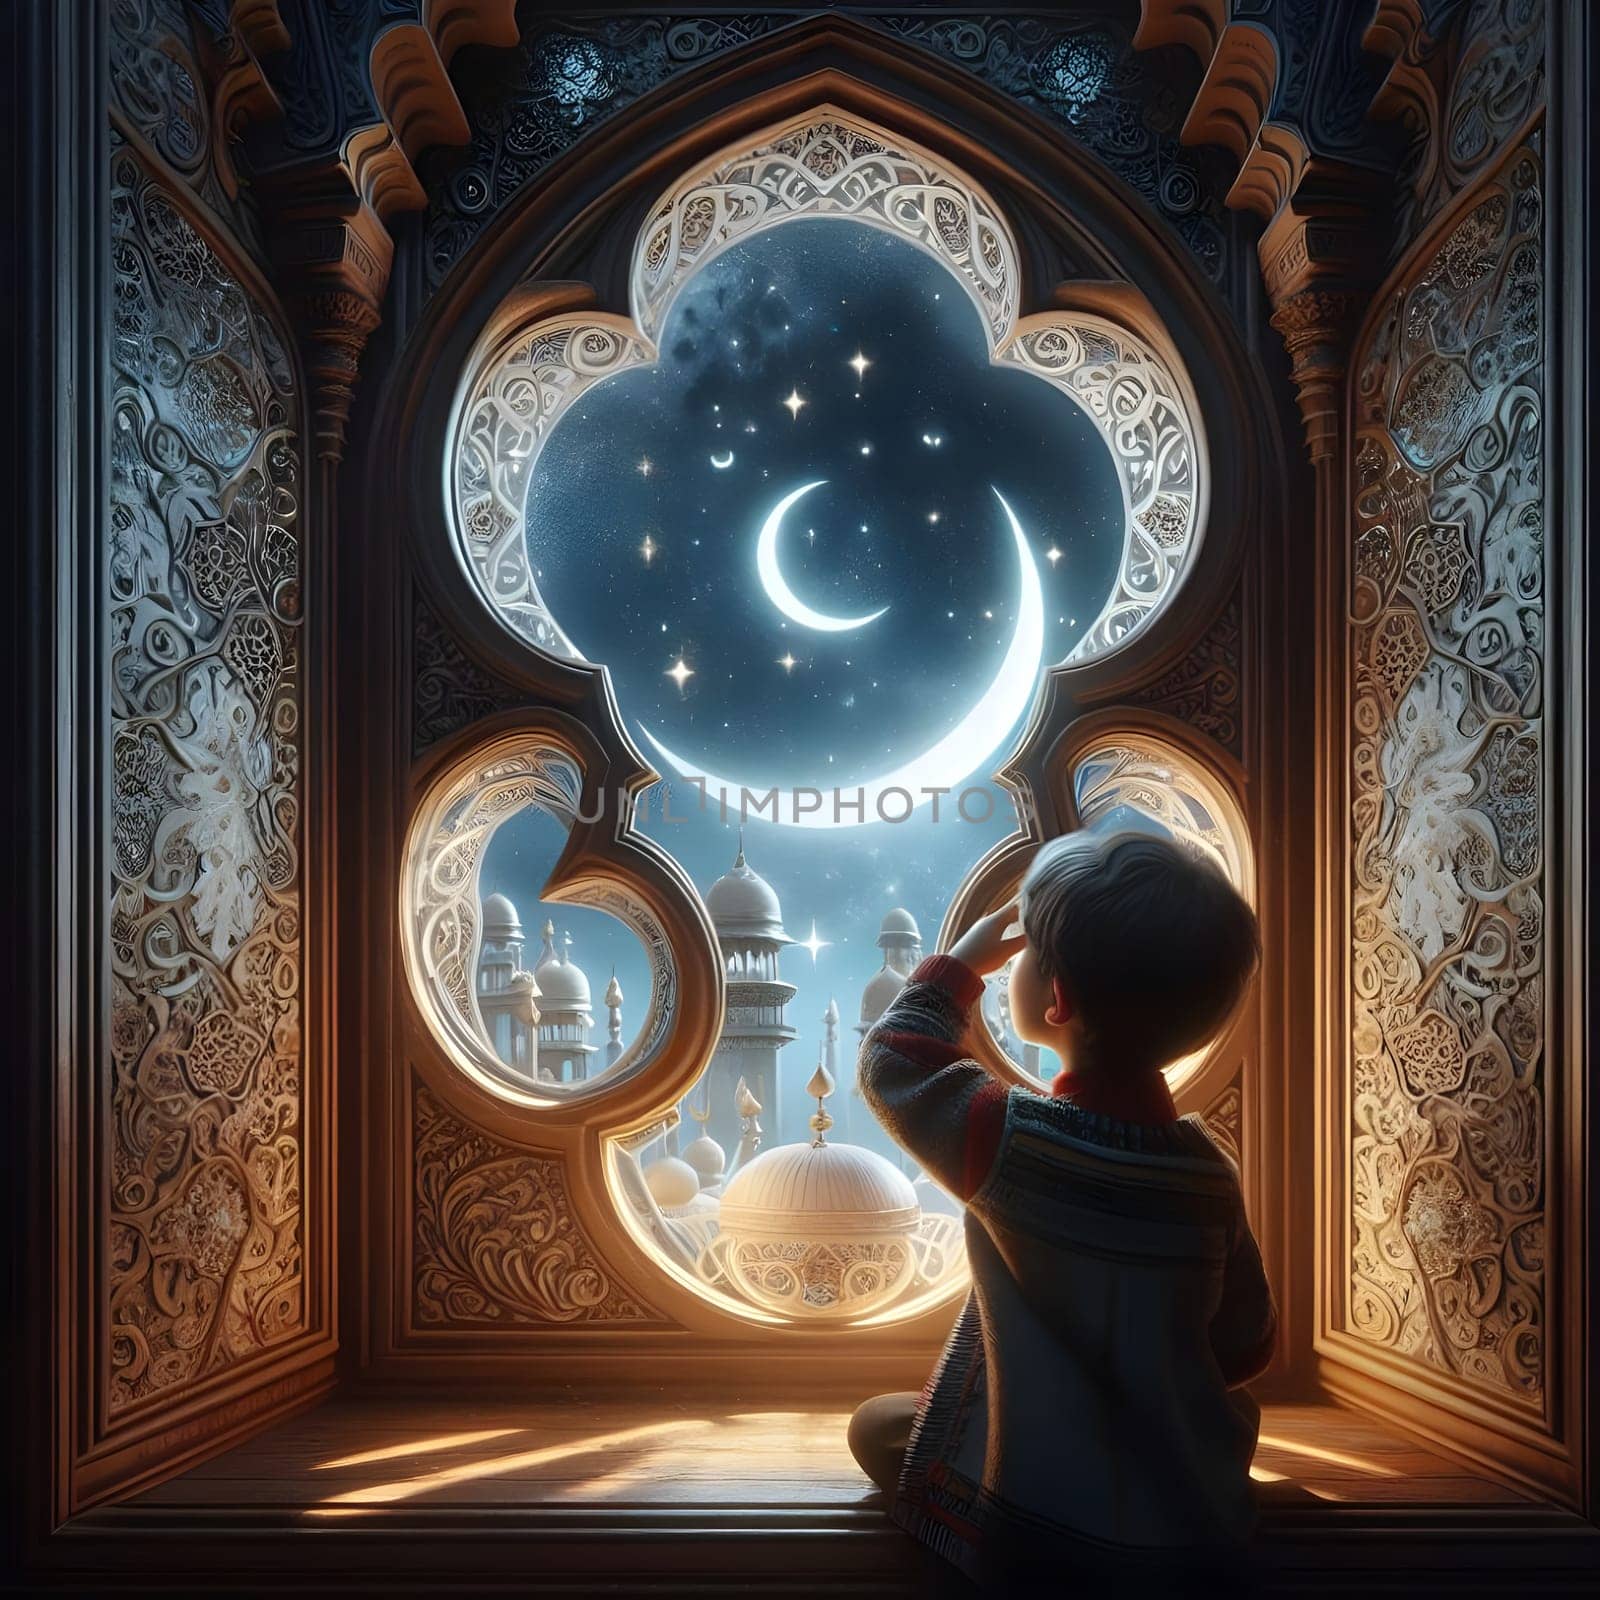 A cute child observing the crescent moon through an ornate window, with reflections of the night sky in his eyes. Last of Happy ramadan, ramadhan, ramazan. High quality photo